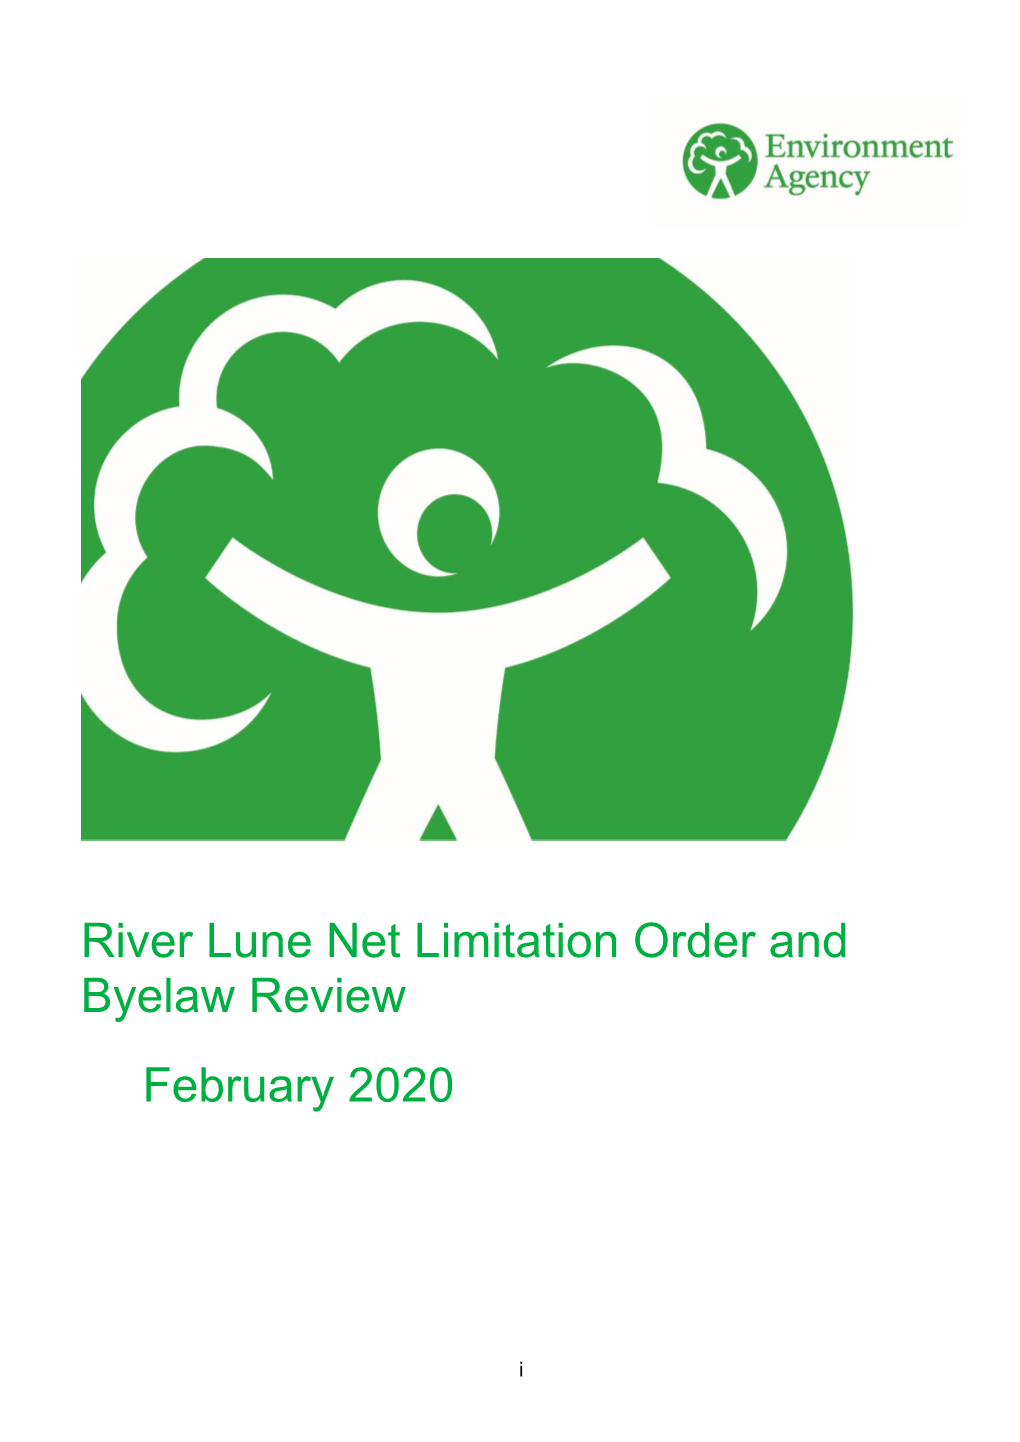 River Lune Net Limitation Order and Byelaw Review February 2020